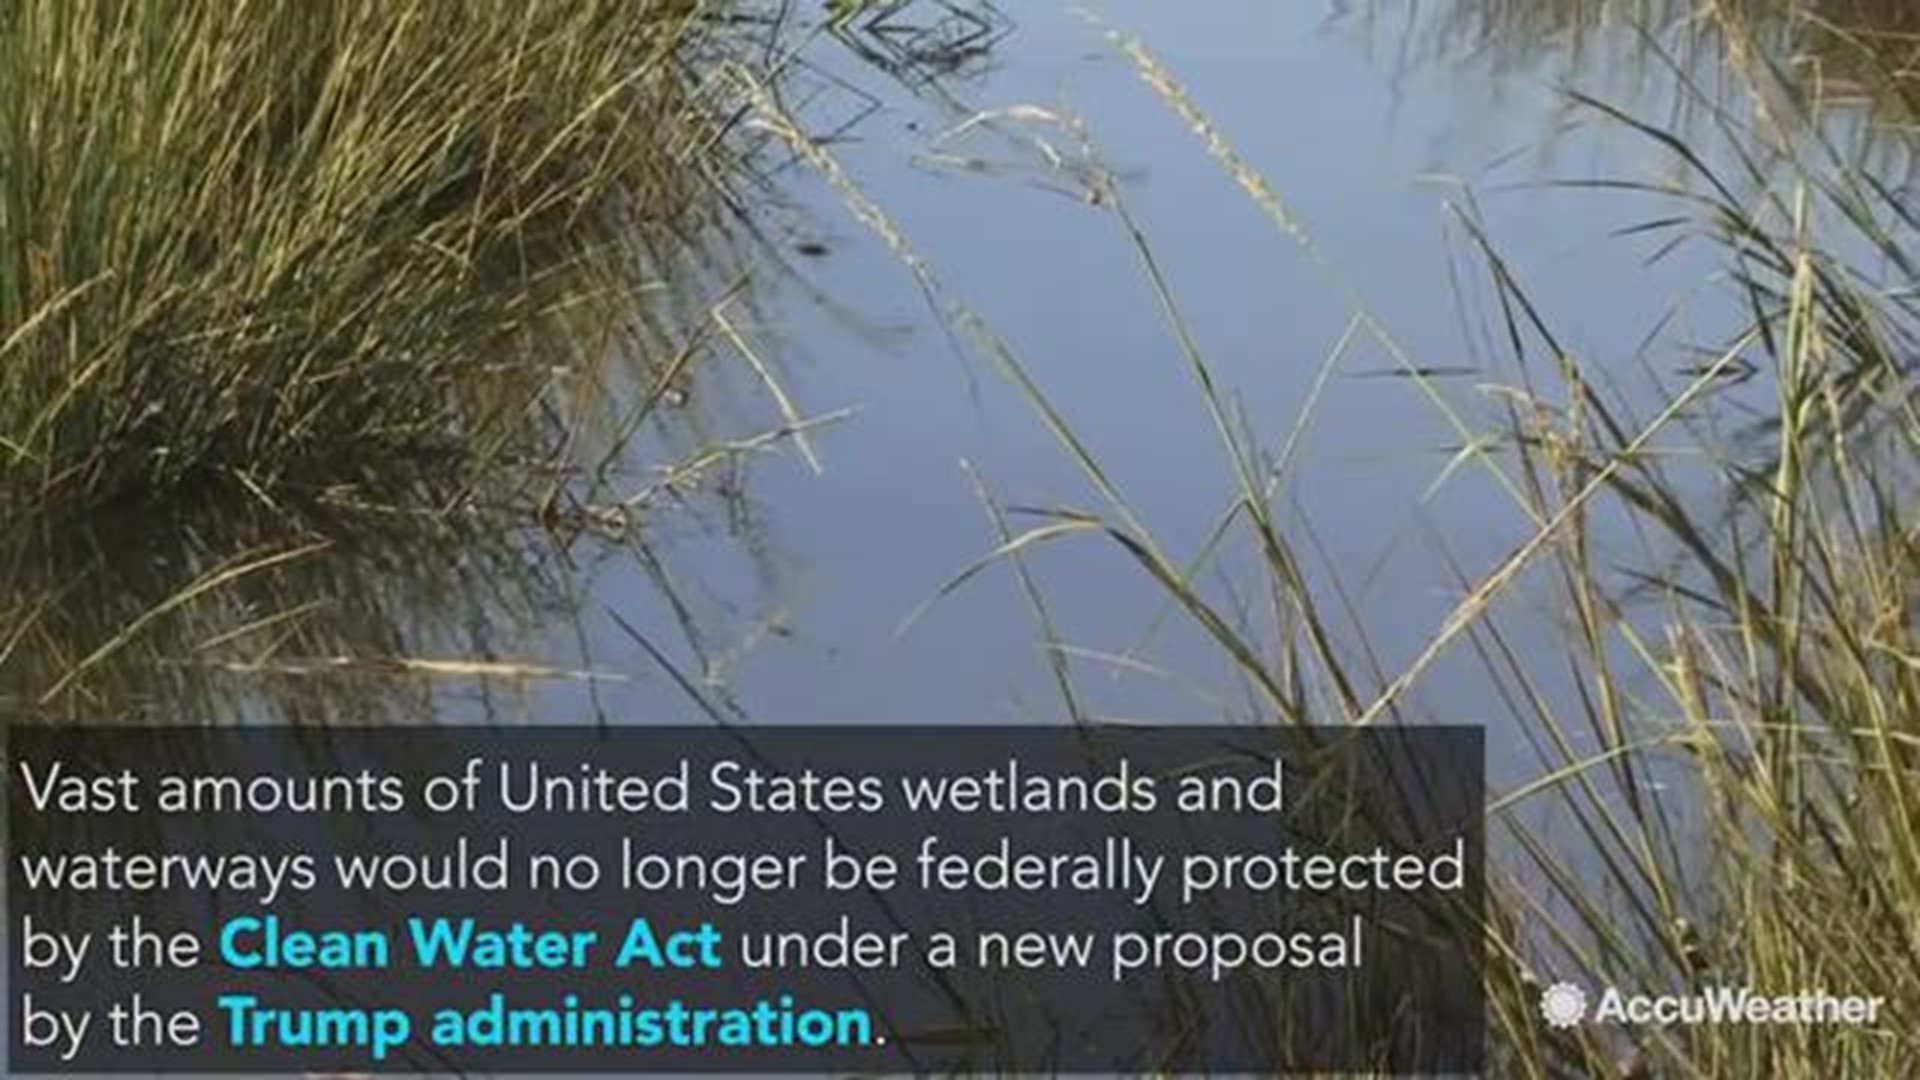 Countless wetlands and thousands of miles of United States waterways would no longer be federally protected by the Clean Water Act under a new proposal by the Trump administration.